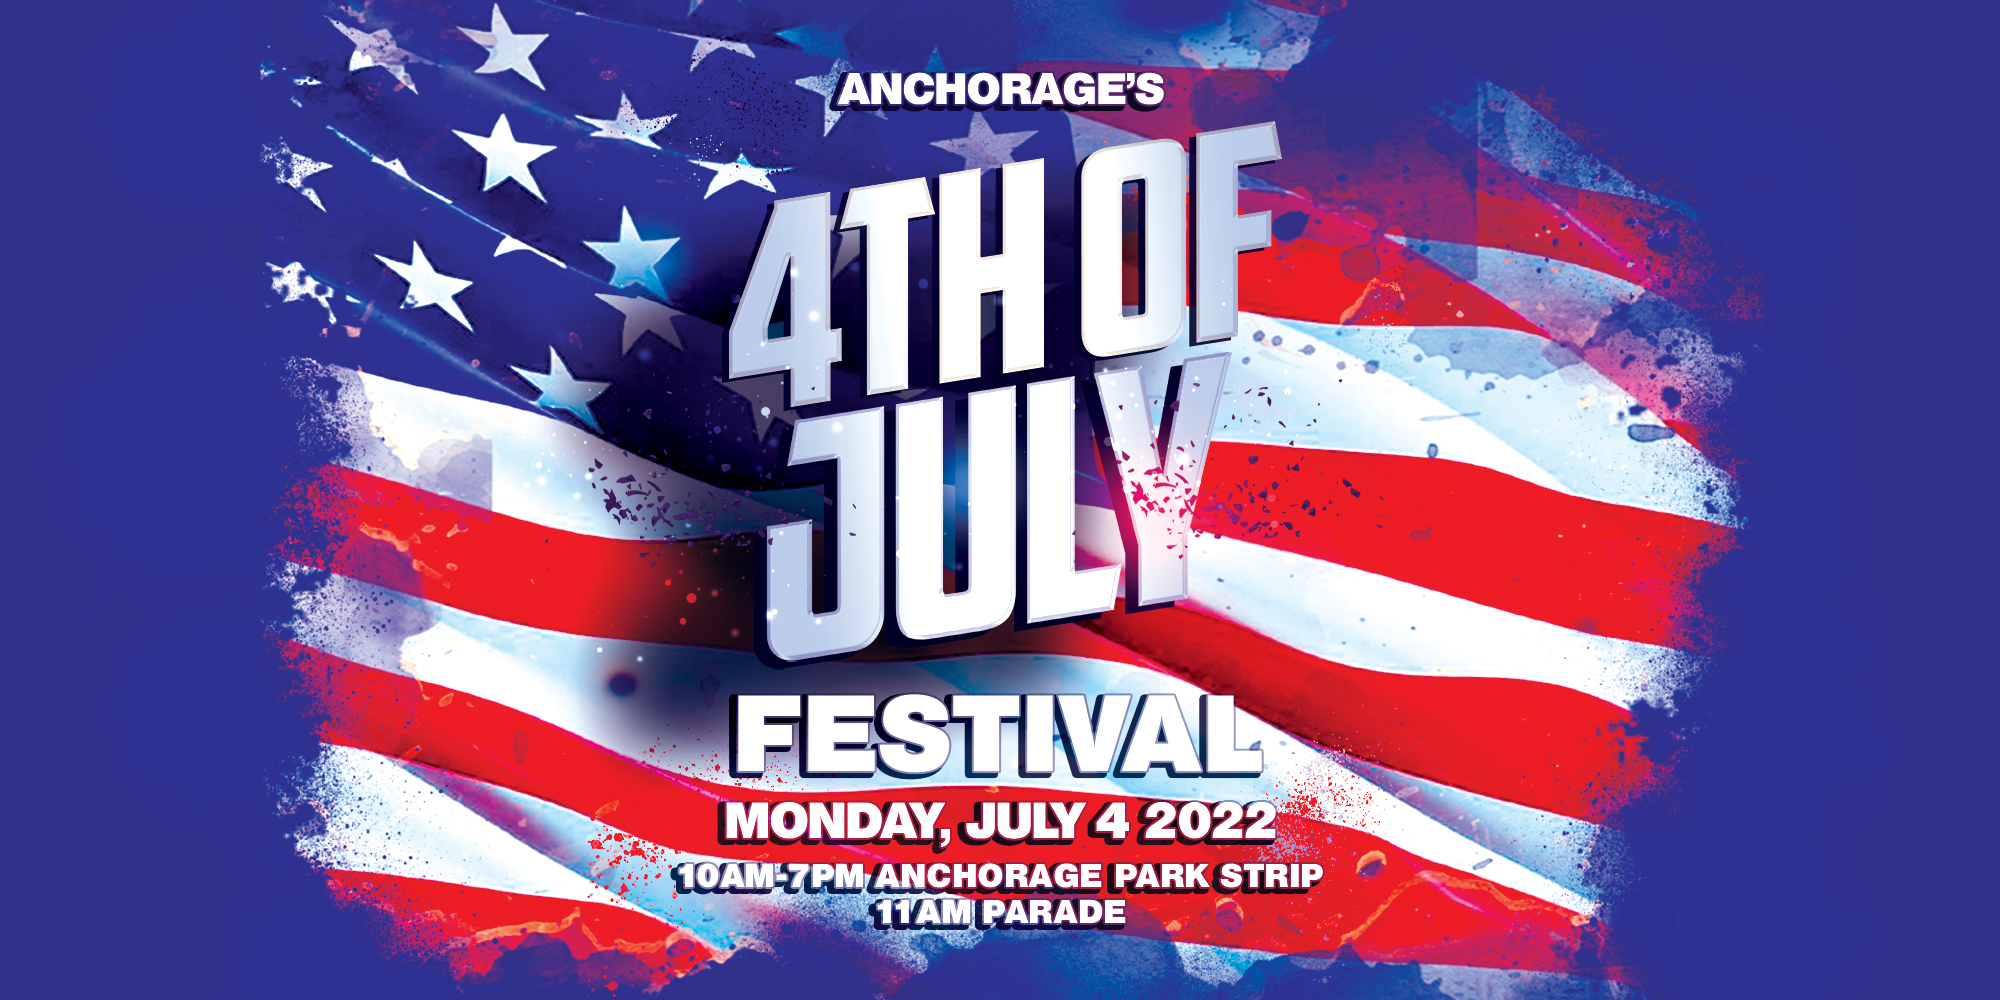 Anchorage's 4th of July Festival